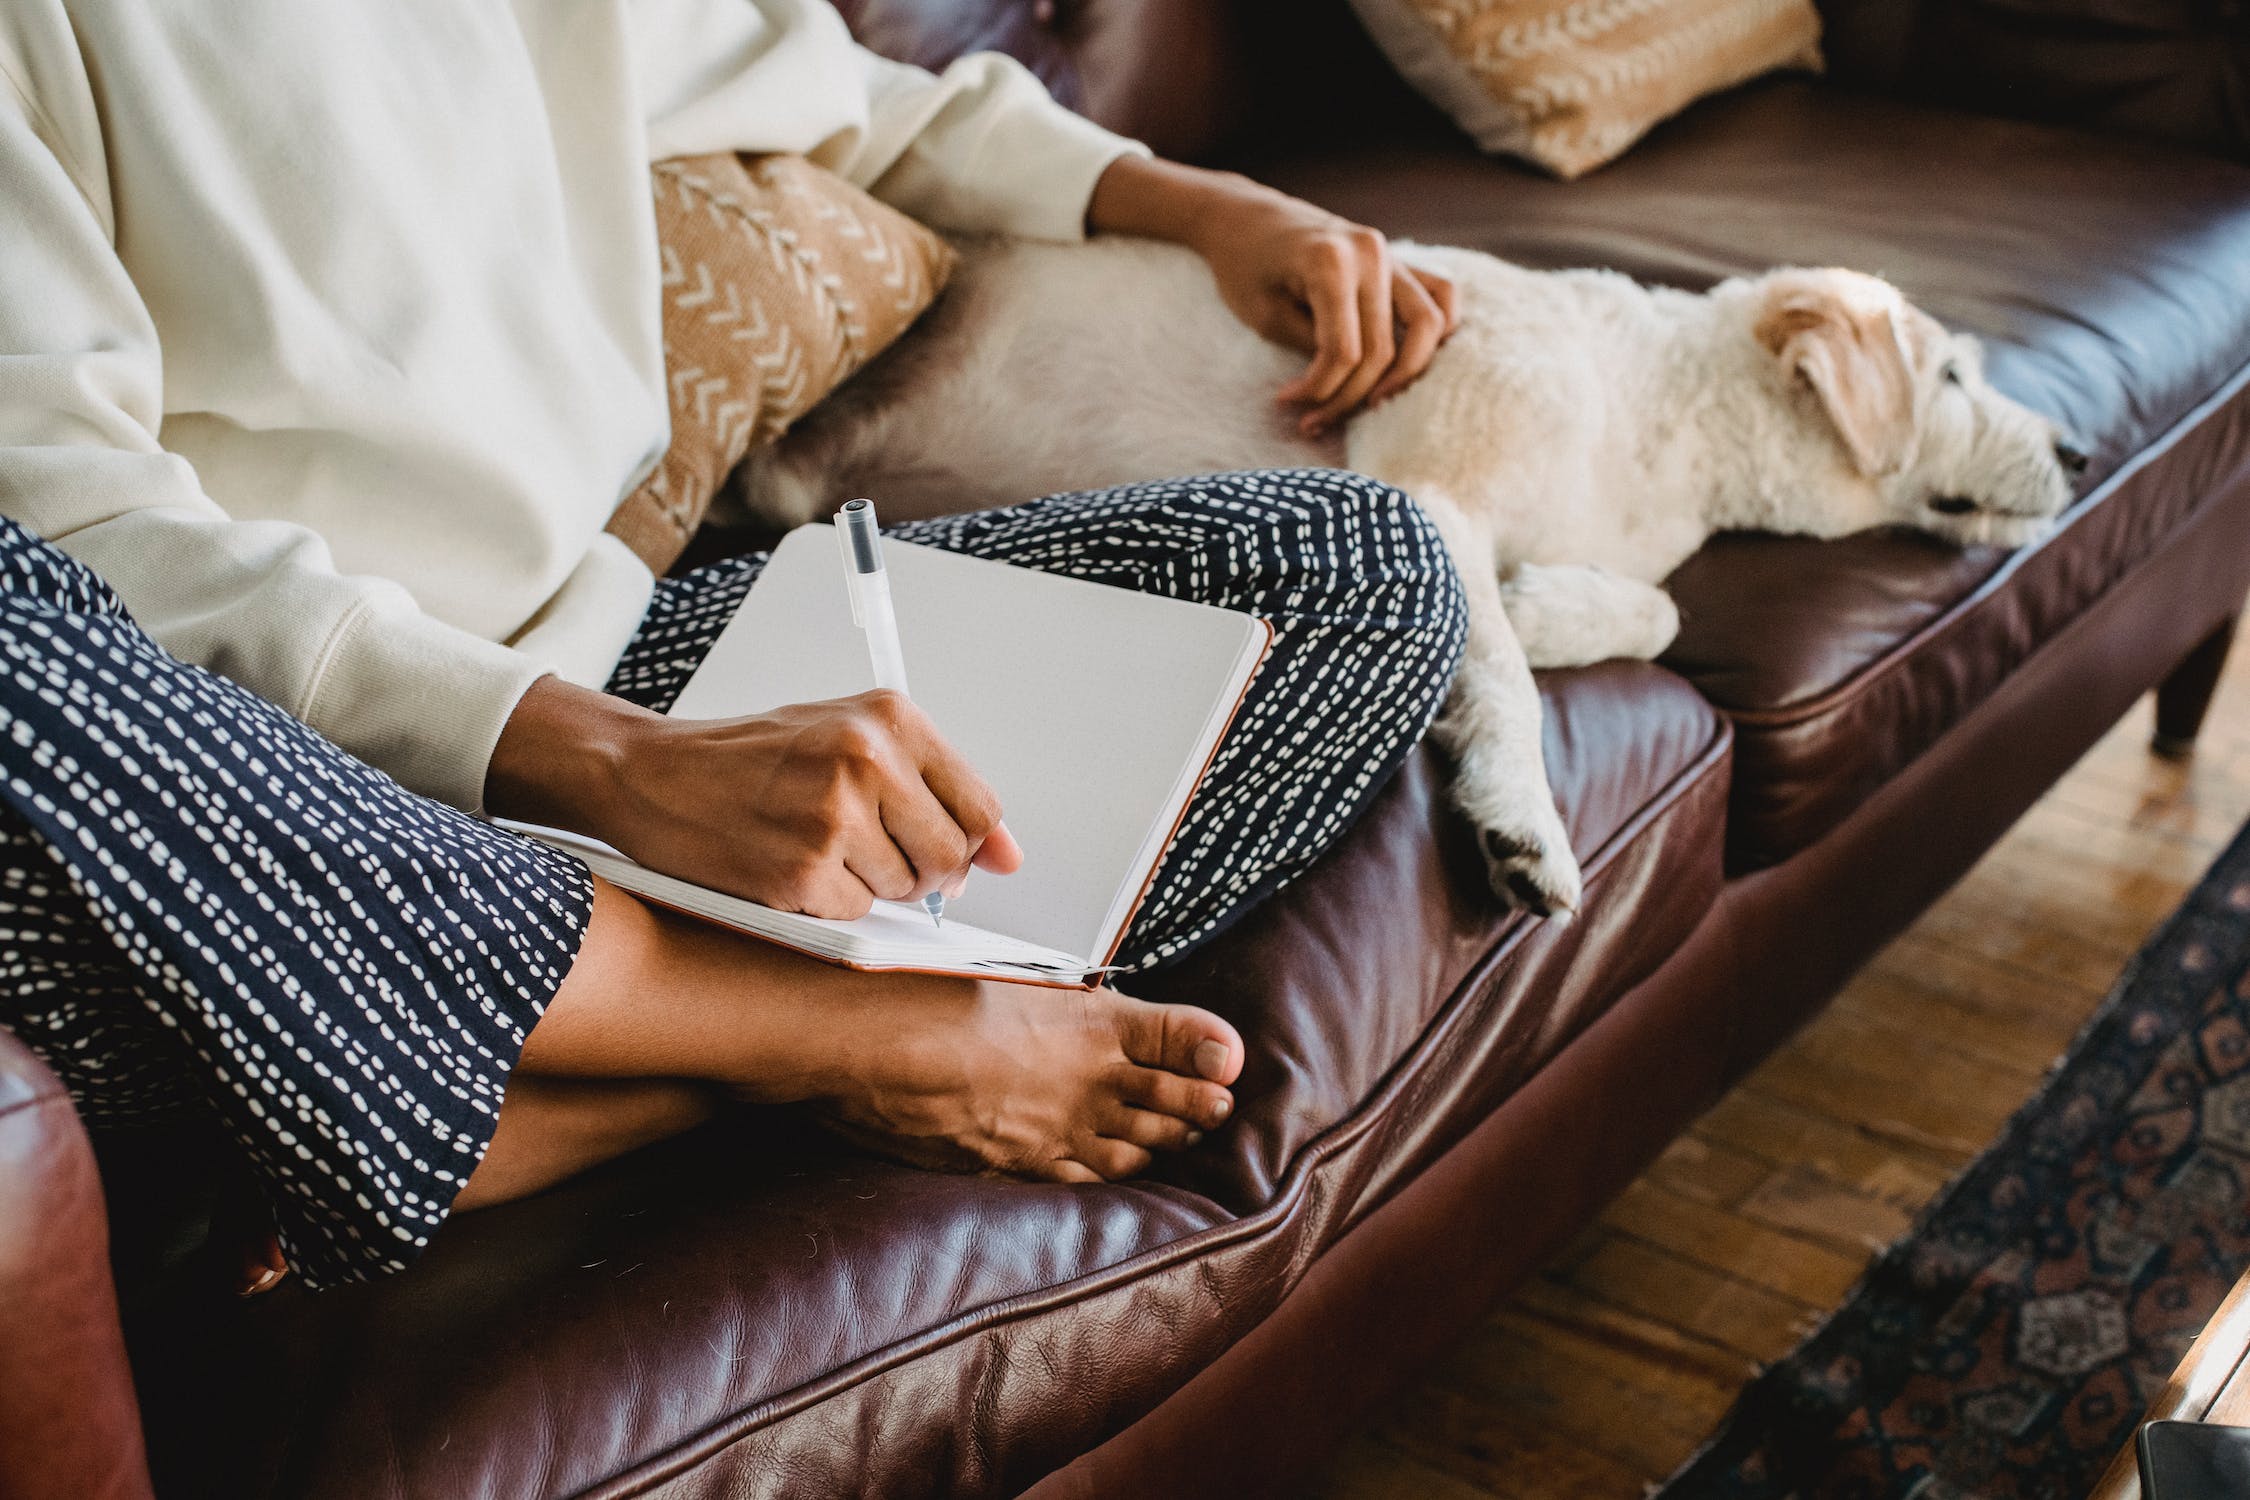 stock photo of someone on couch sitting criss cross with one hand holding pen and writing in journal and other hand on dog laying on couch.